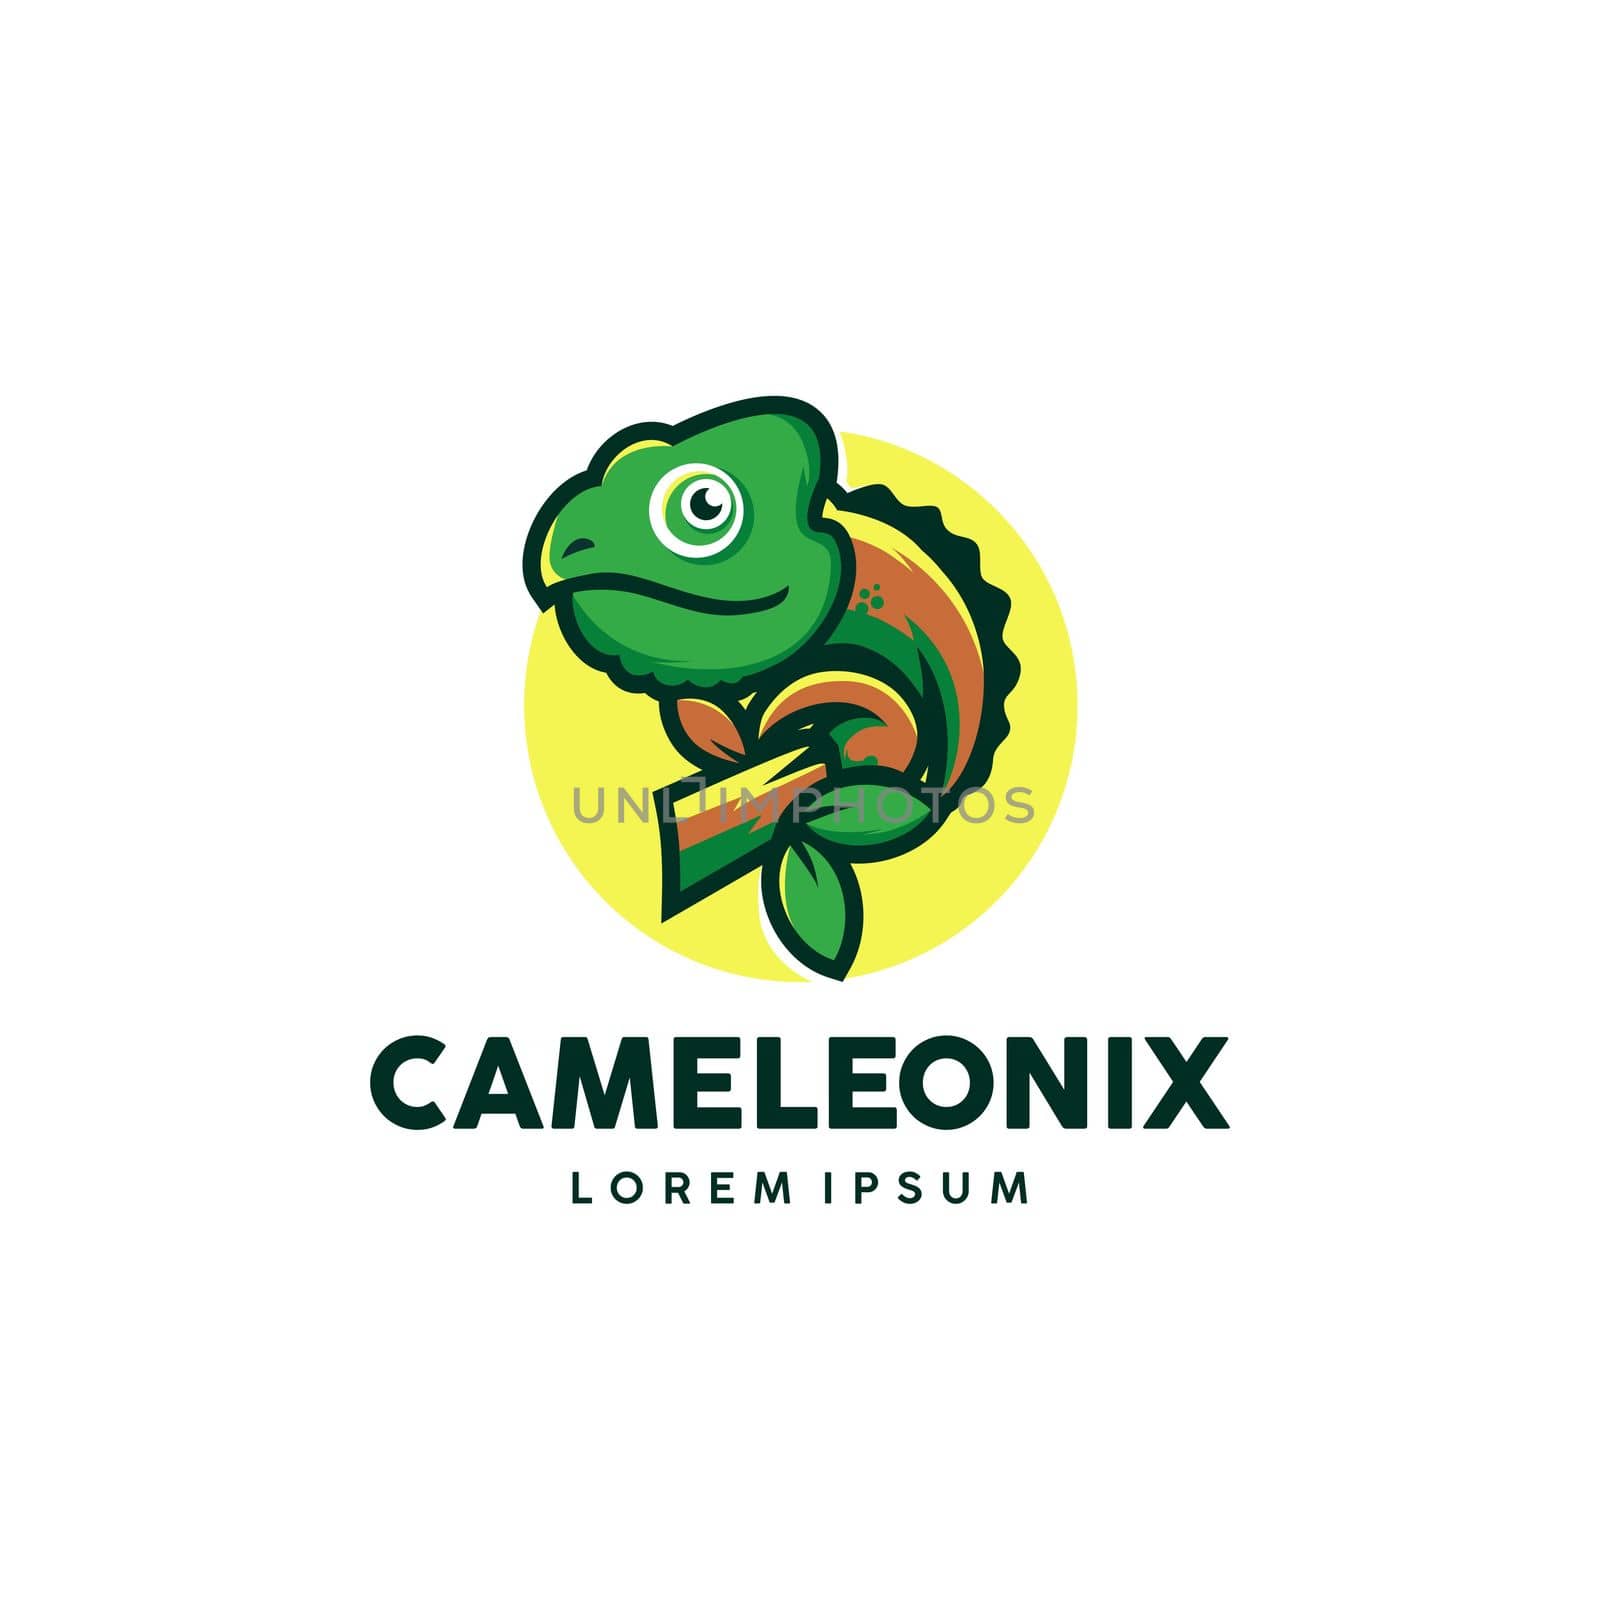 Exotic Chameleon logo template. Colored lizard grasping on tree branch vector design. Exotic animal design stock illustration by IreIru